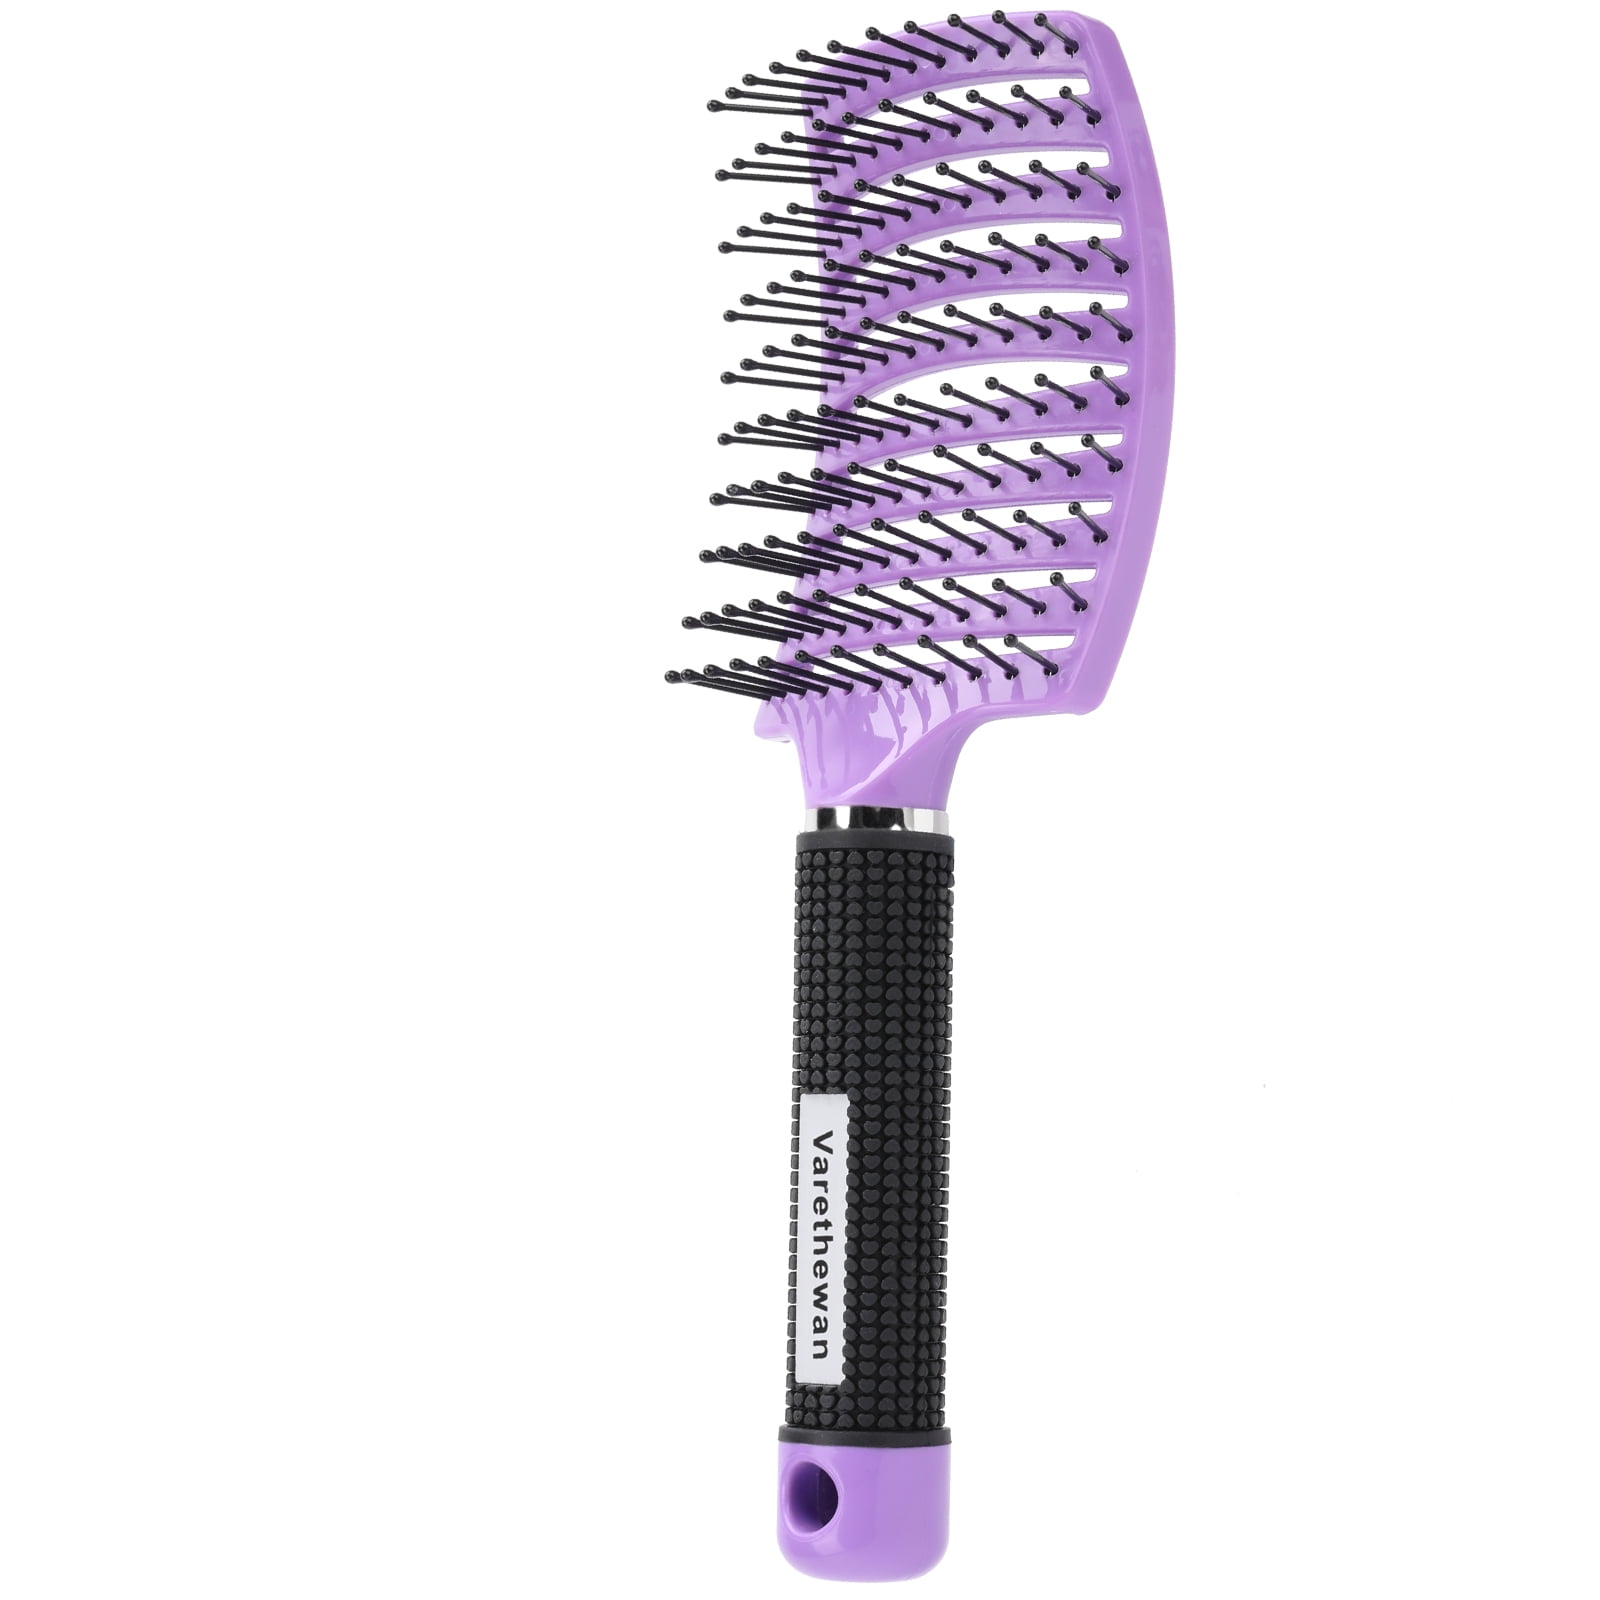 Boar Bristle Hair Brush 2 Pack, HIPPIH Wet & Dry No Pull Curved